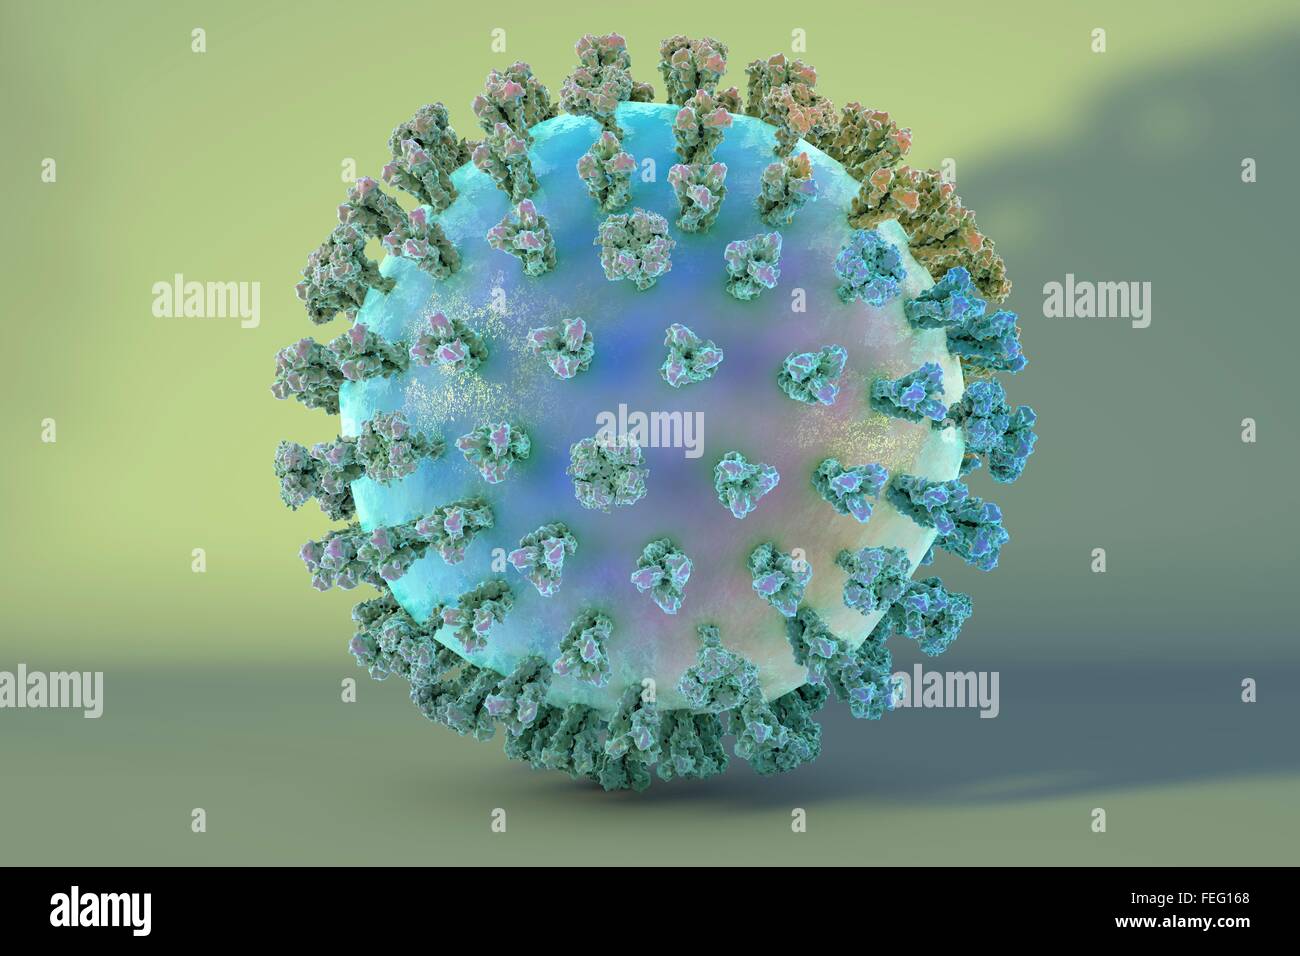 Swine flu virus H1N1. Illustration showing influenza virus with surface glycoprotein spikes hemagglutinin (HA, red) and Stock Photo